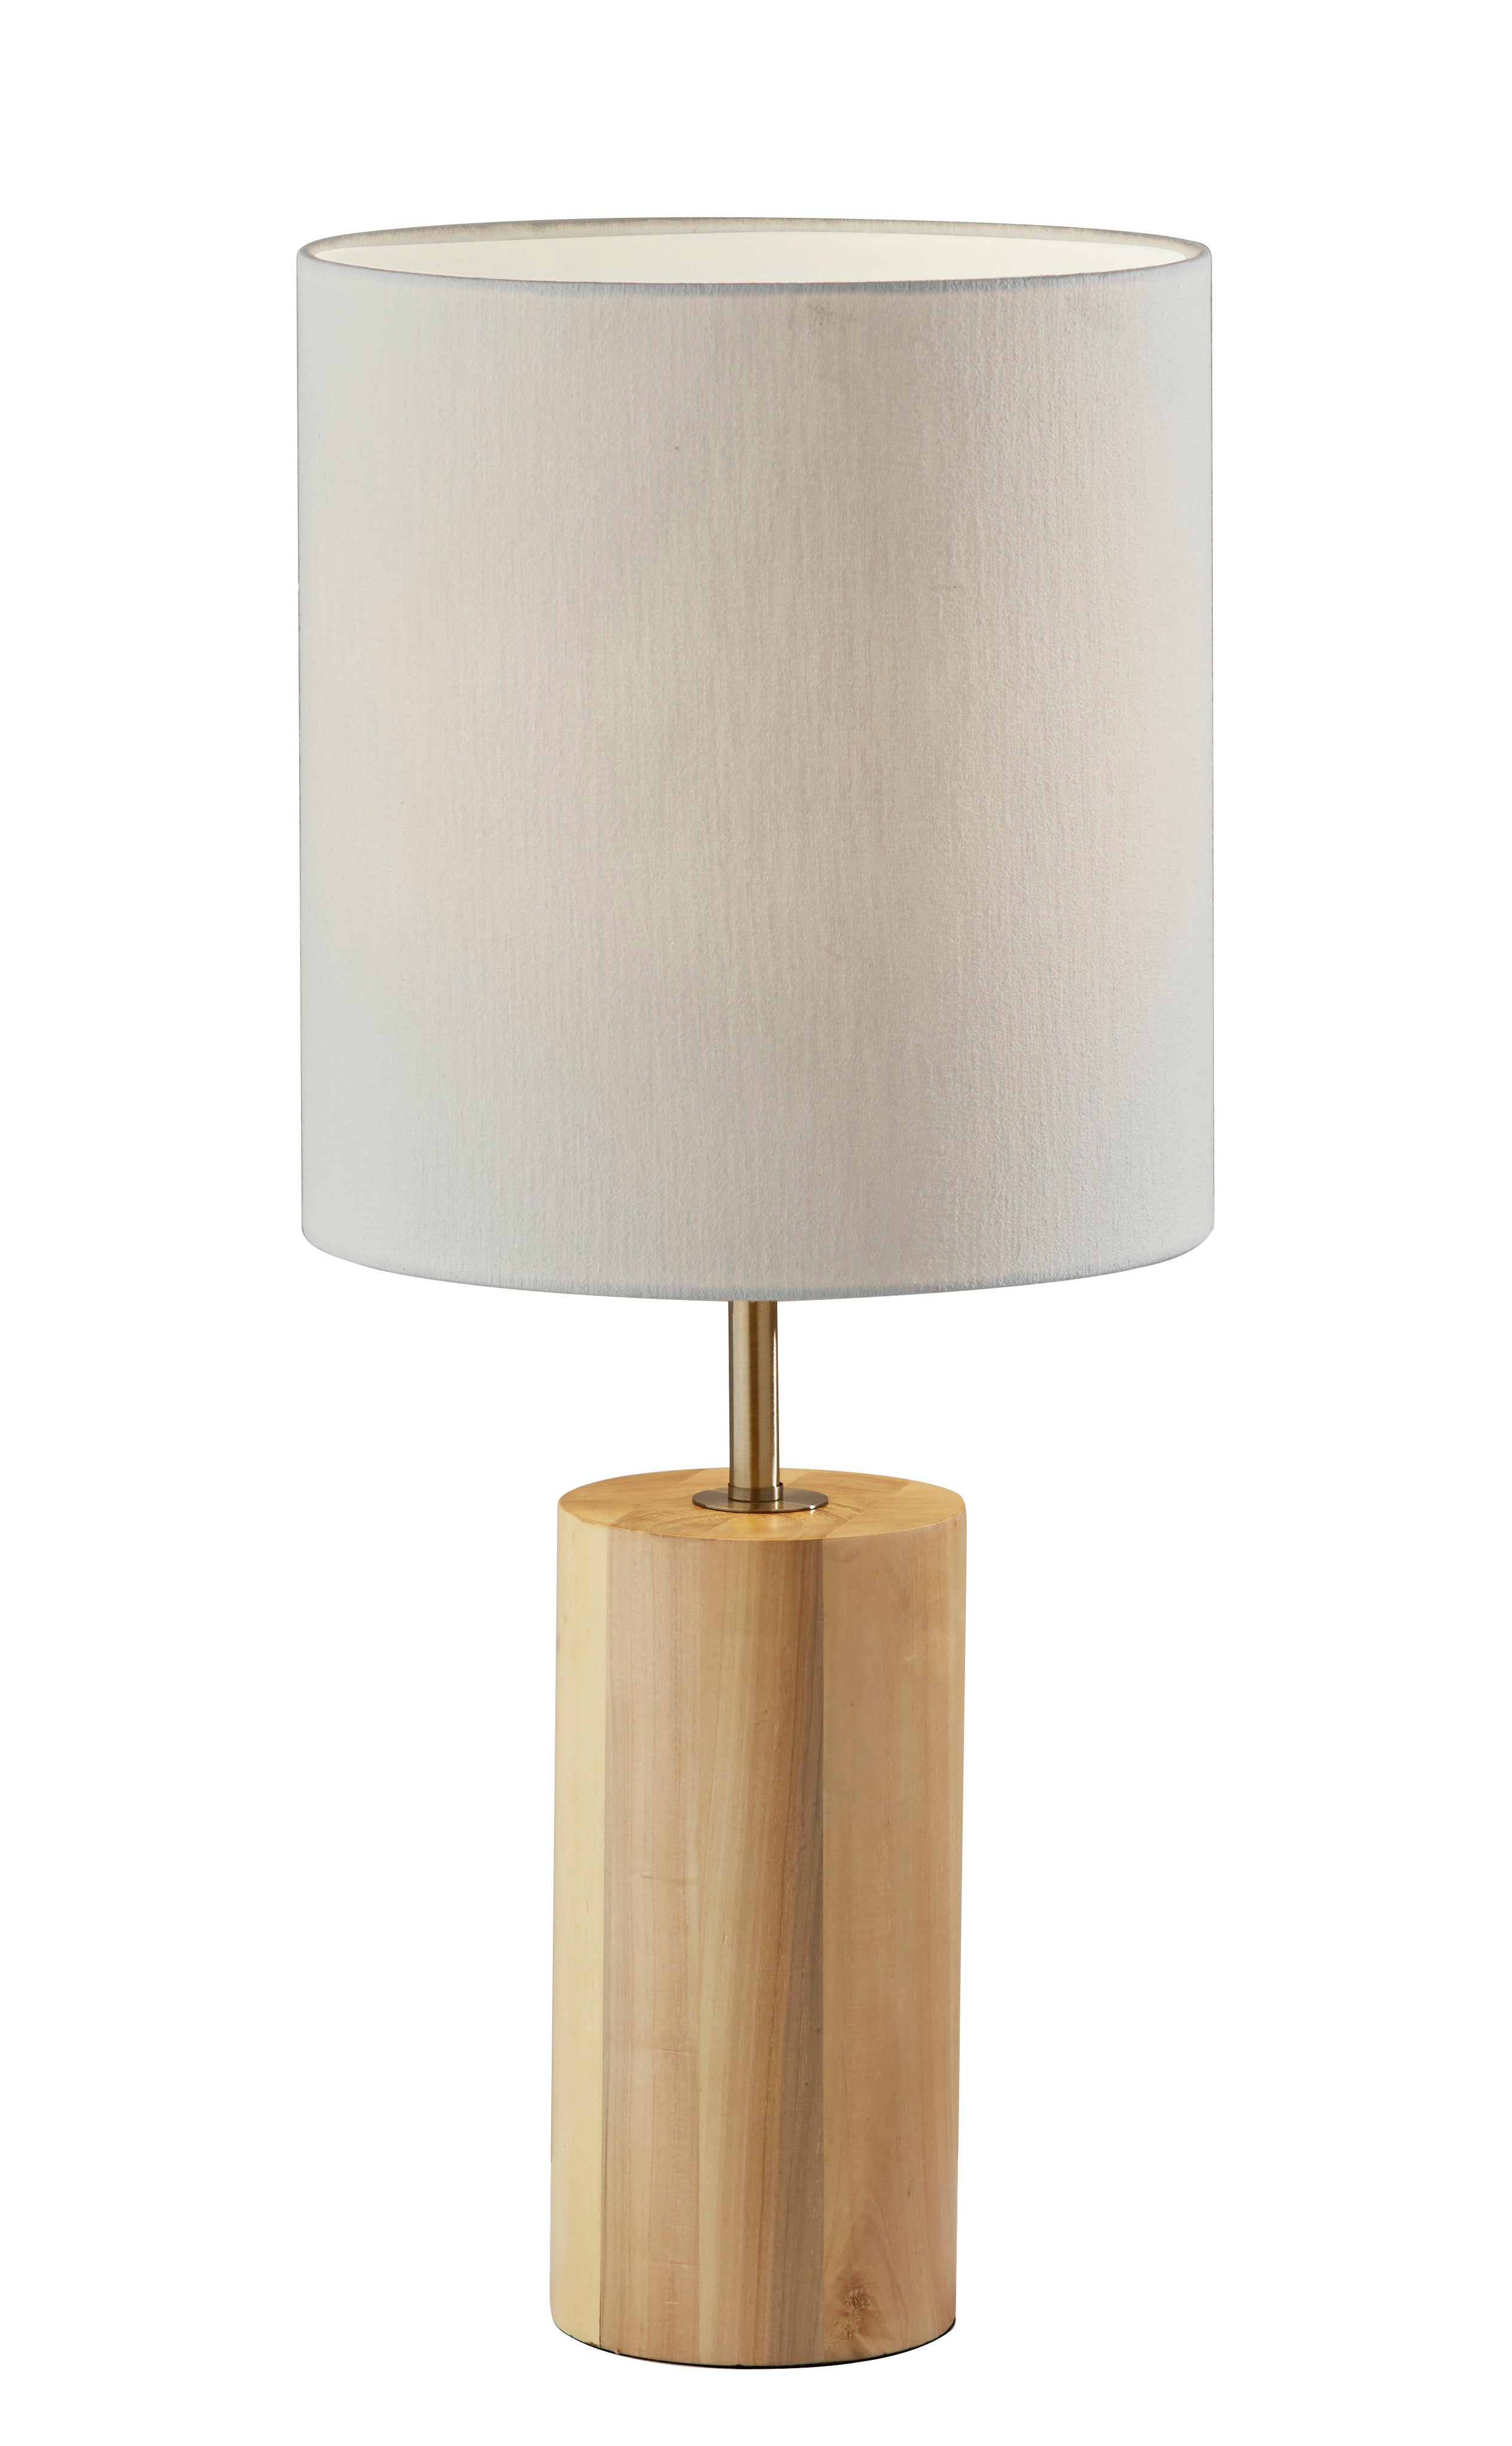 DEAN Table lamp Wood, Gold - 1507-12 | ADESSO